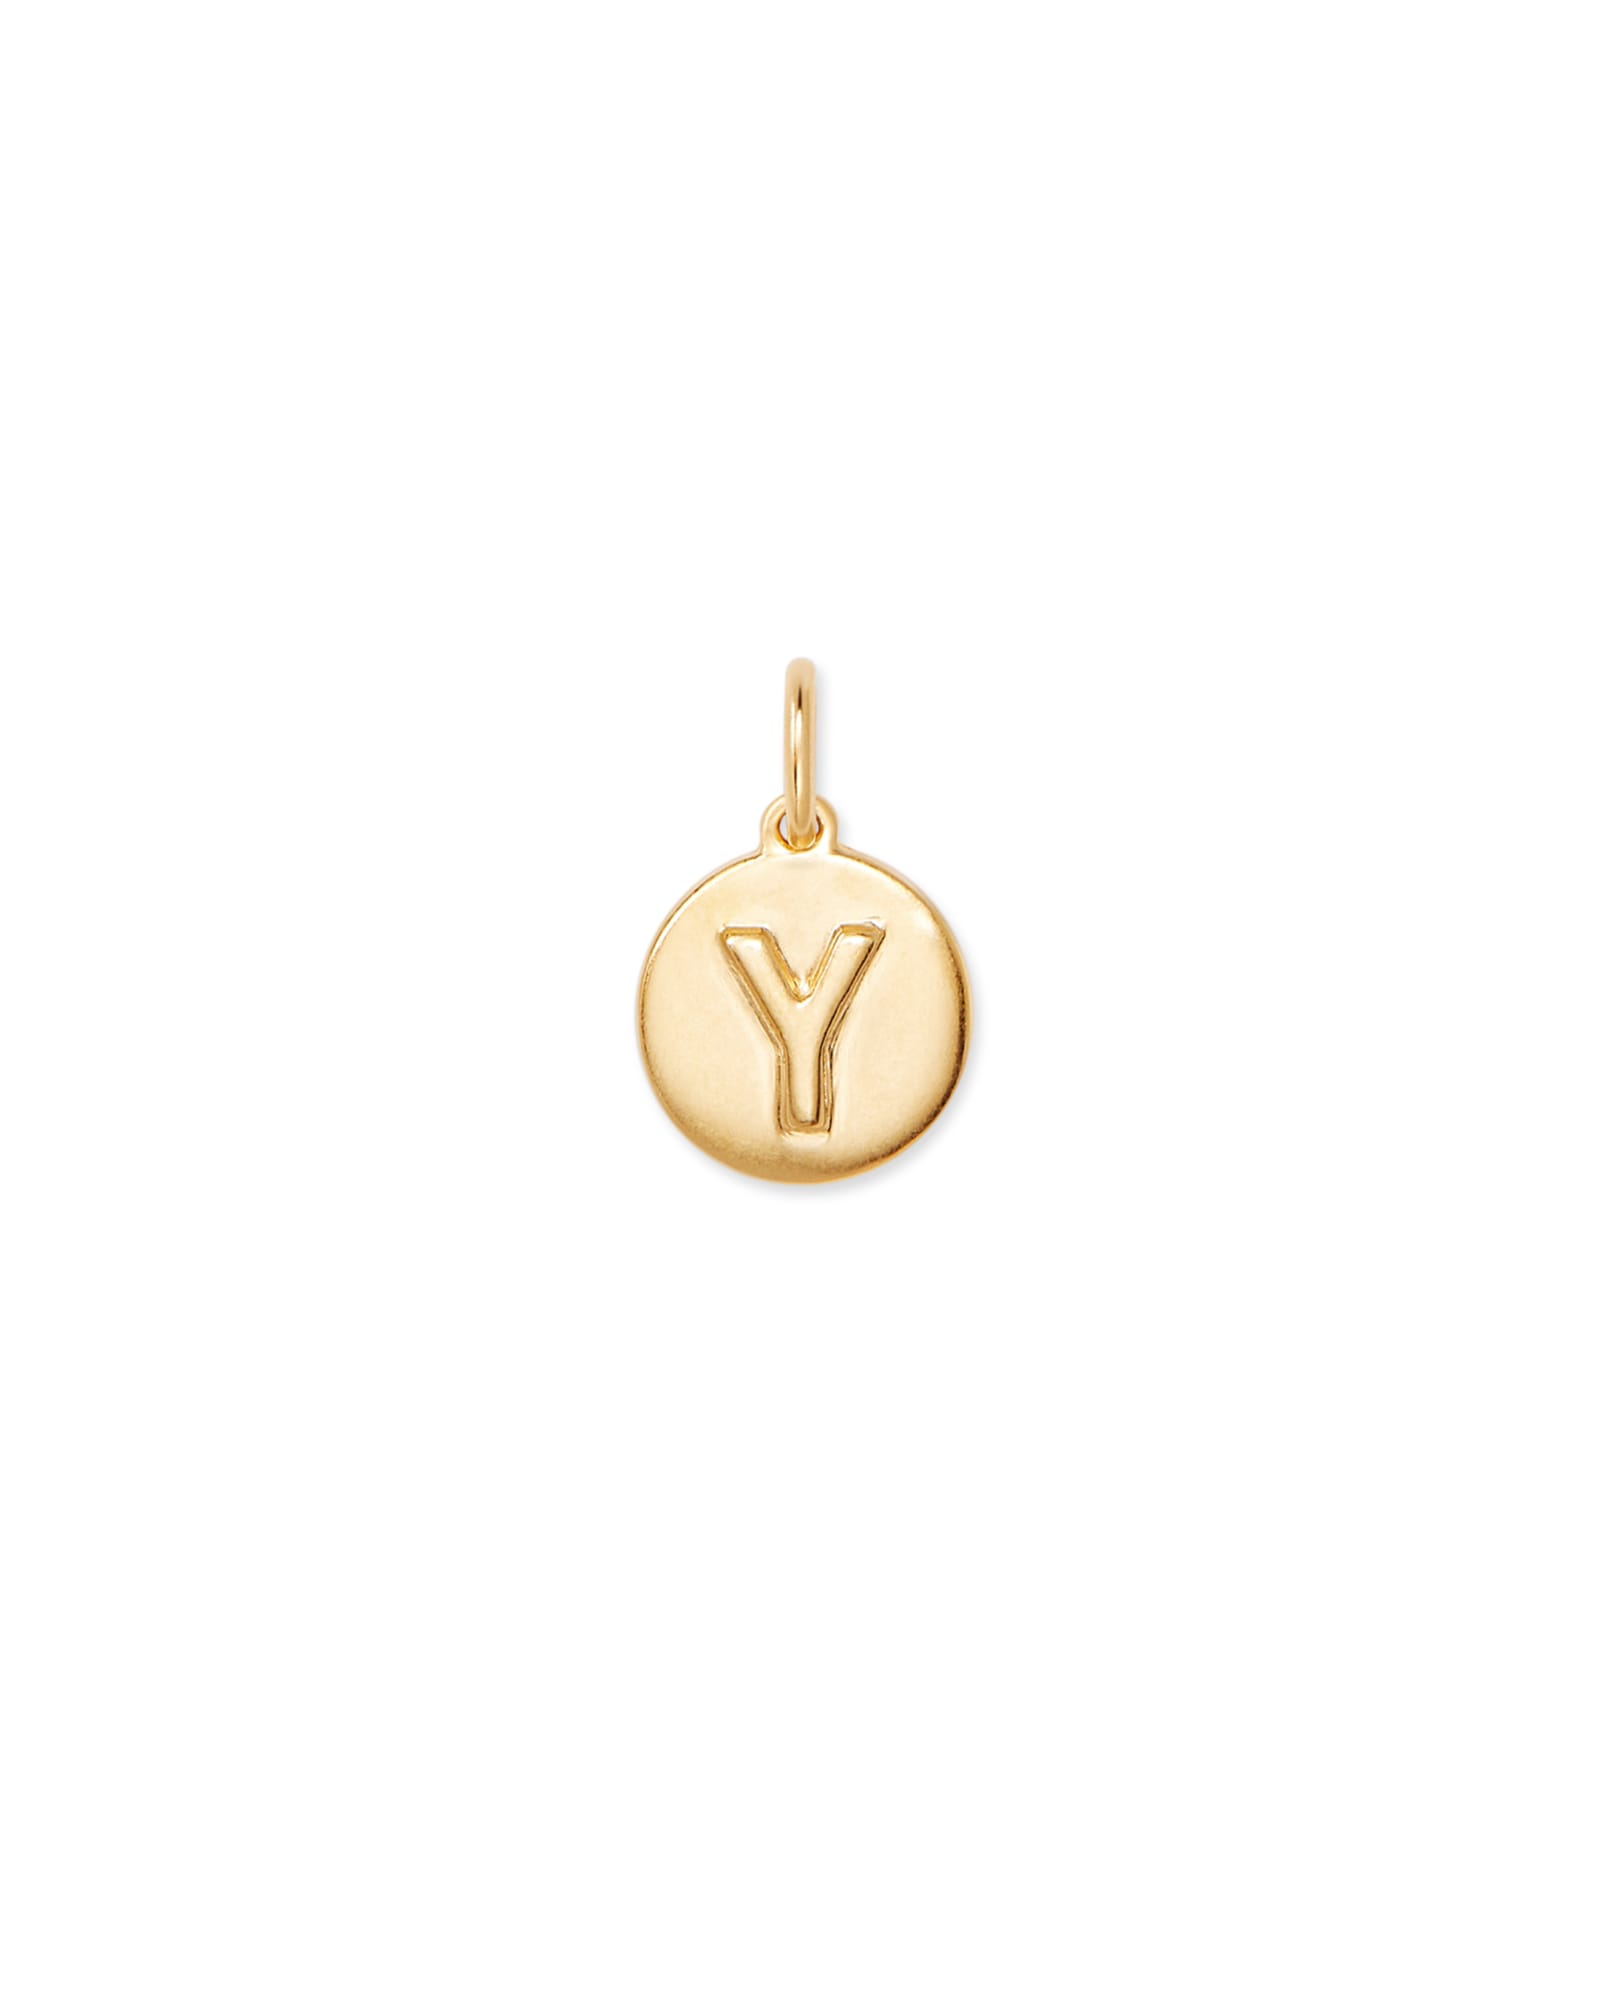 Kendra Scott Letter Y Coin Charm in 18k Gold Vermeil | Sterling Silver